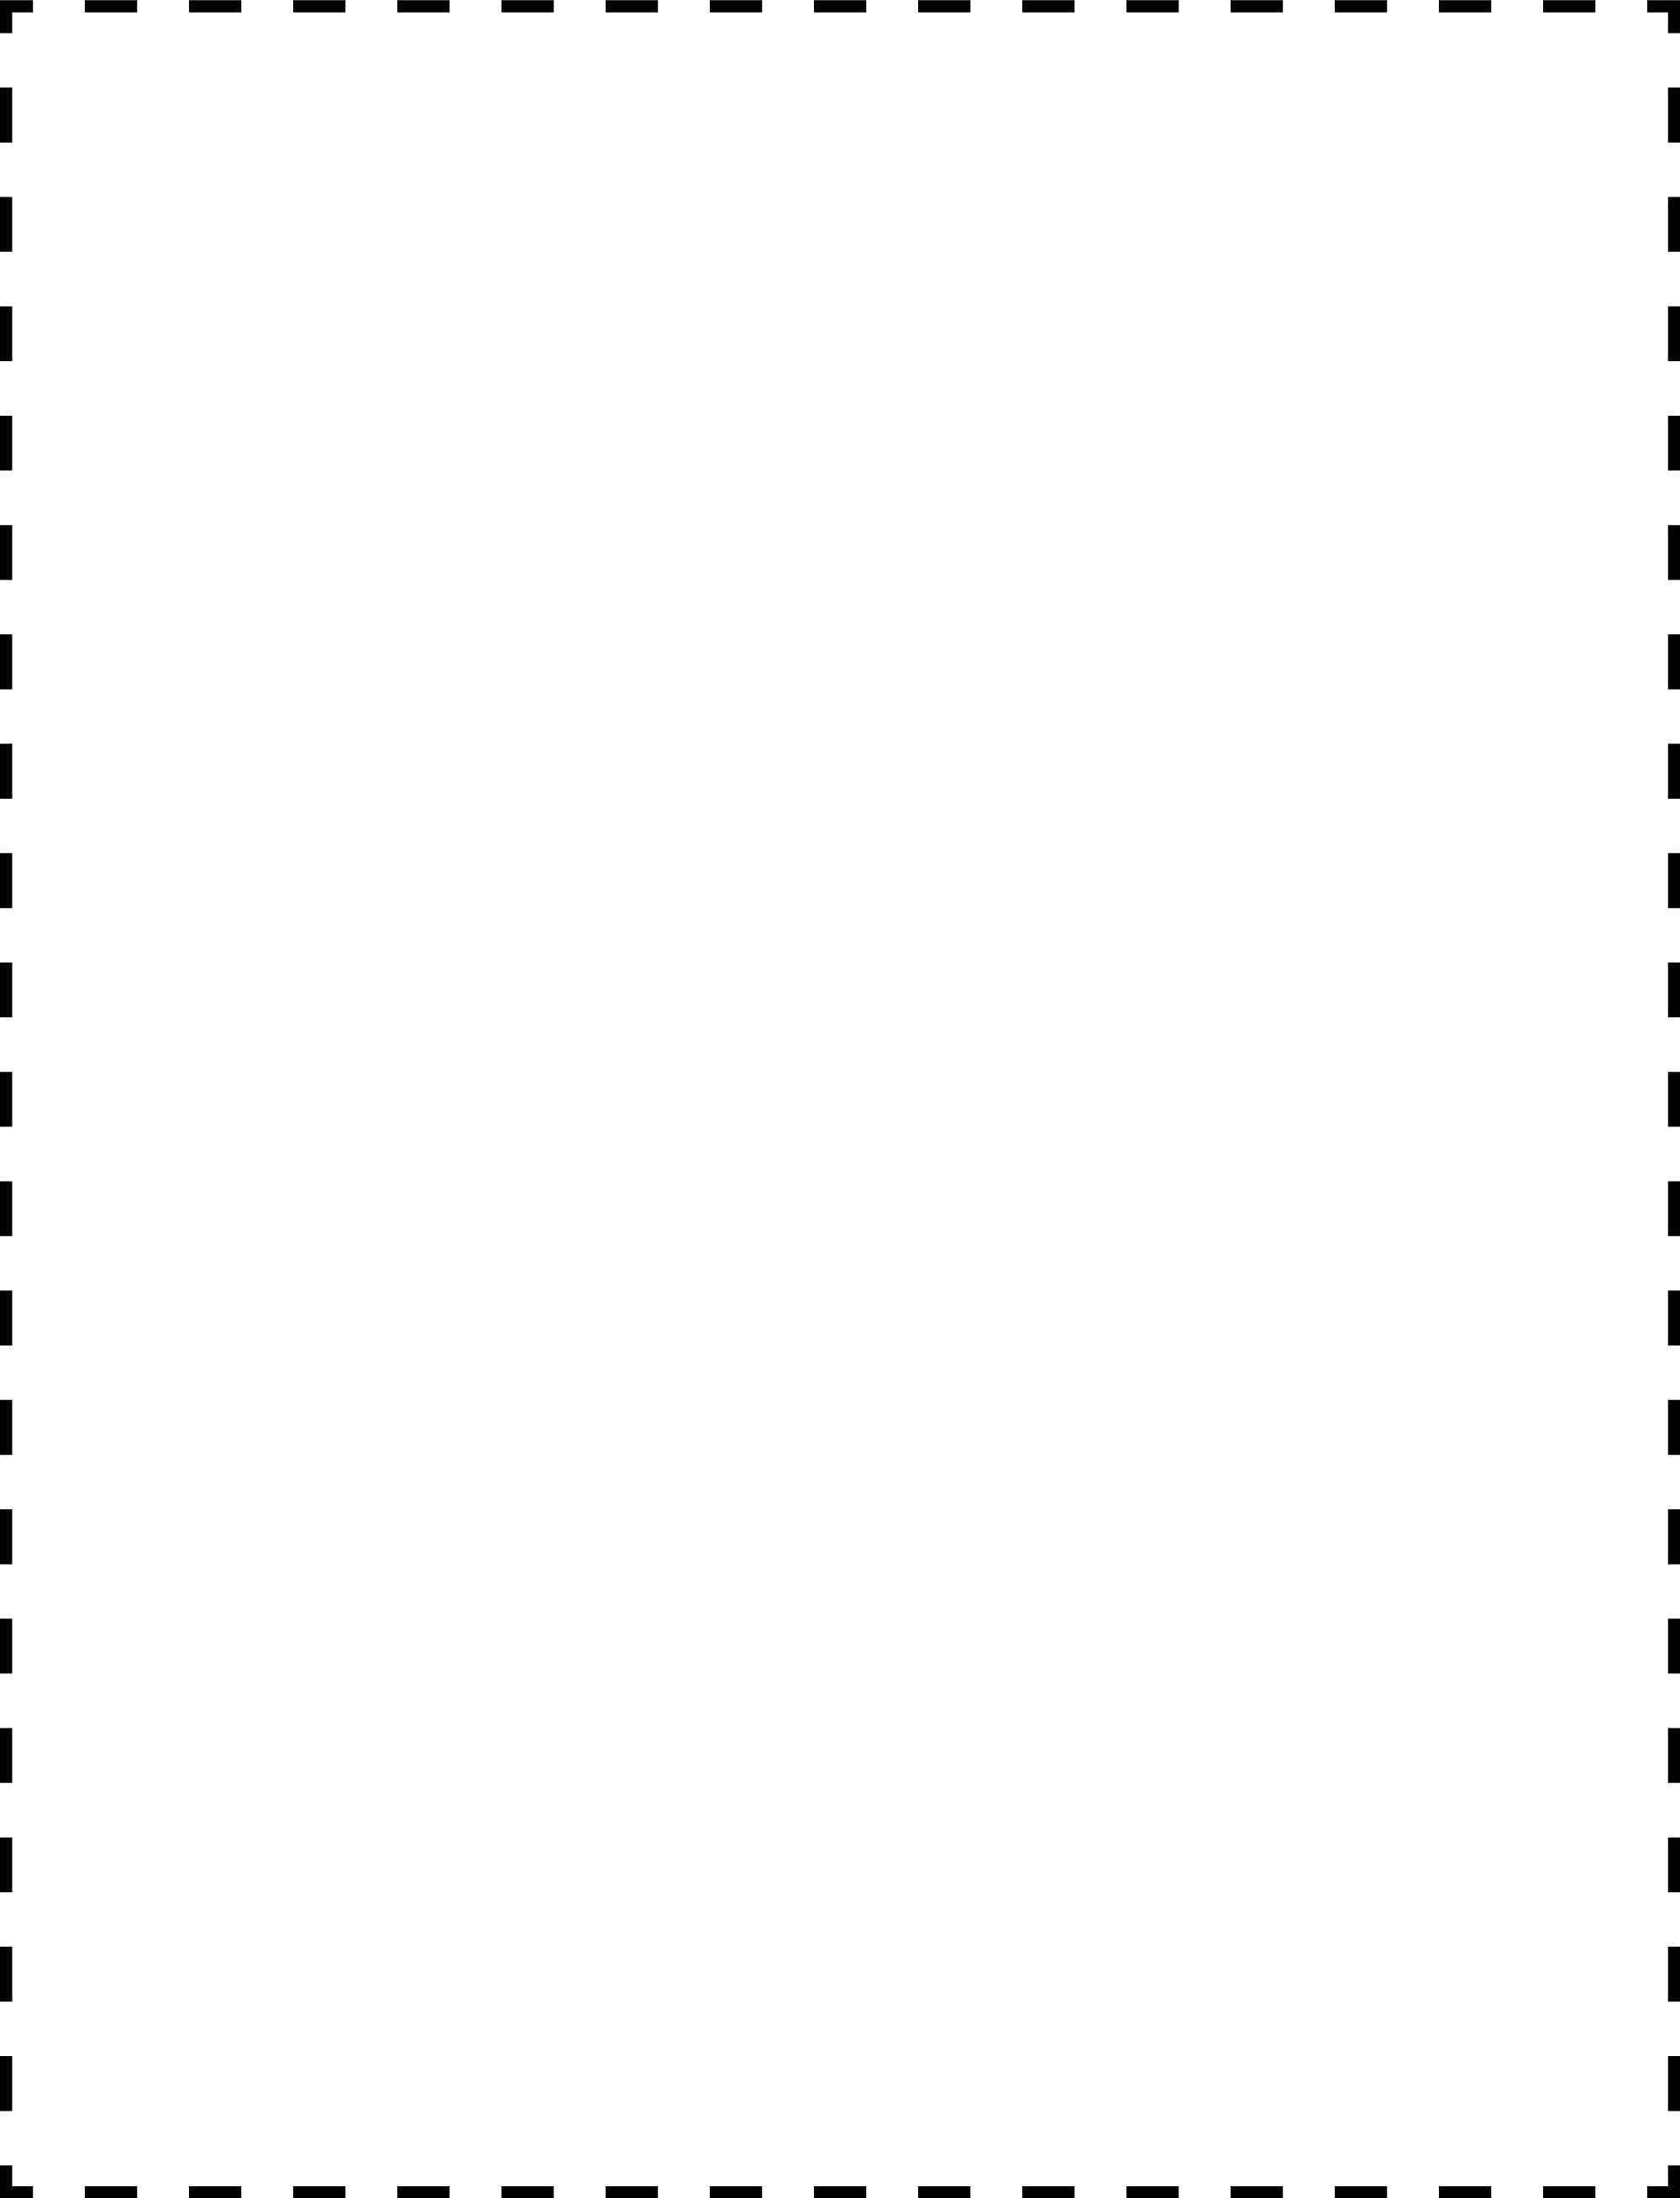 538-2275-coupon-outline-4x5-k.png